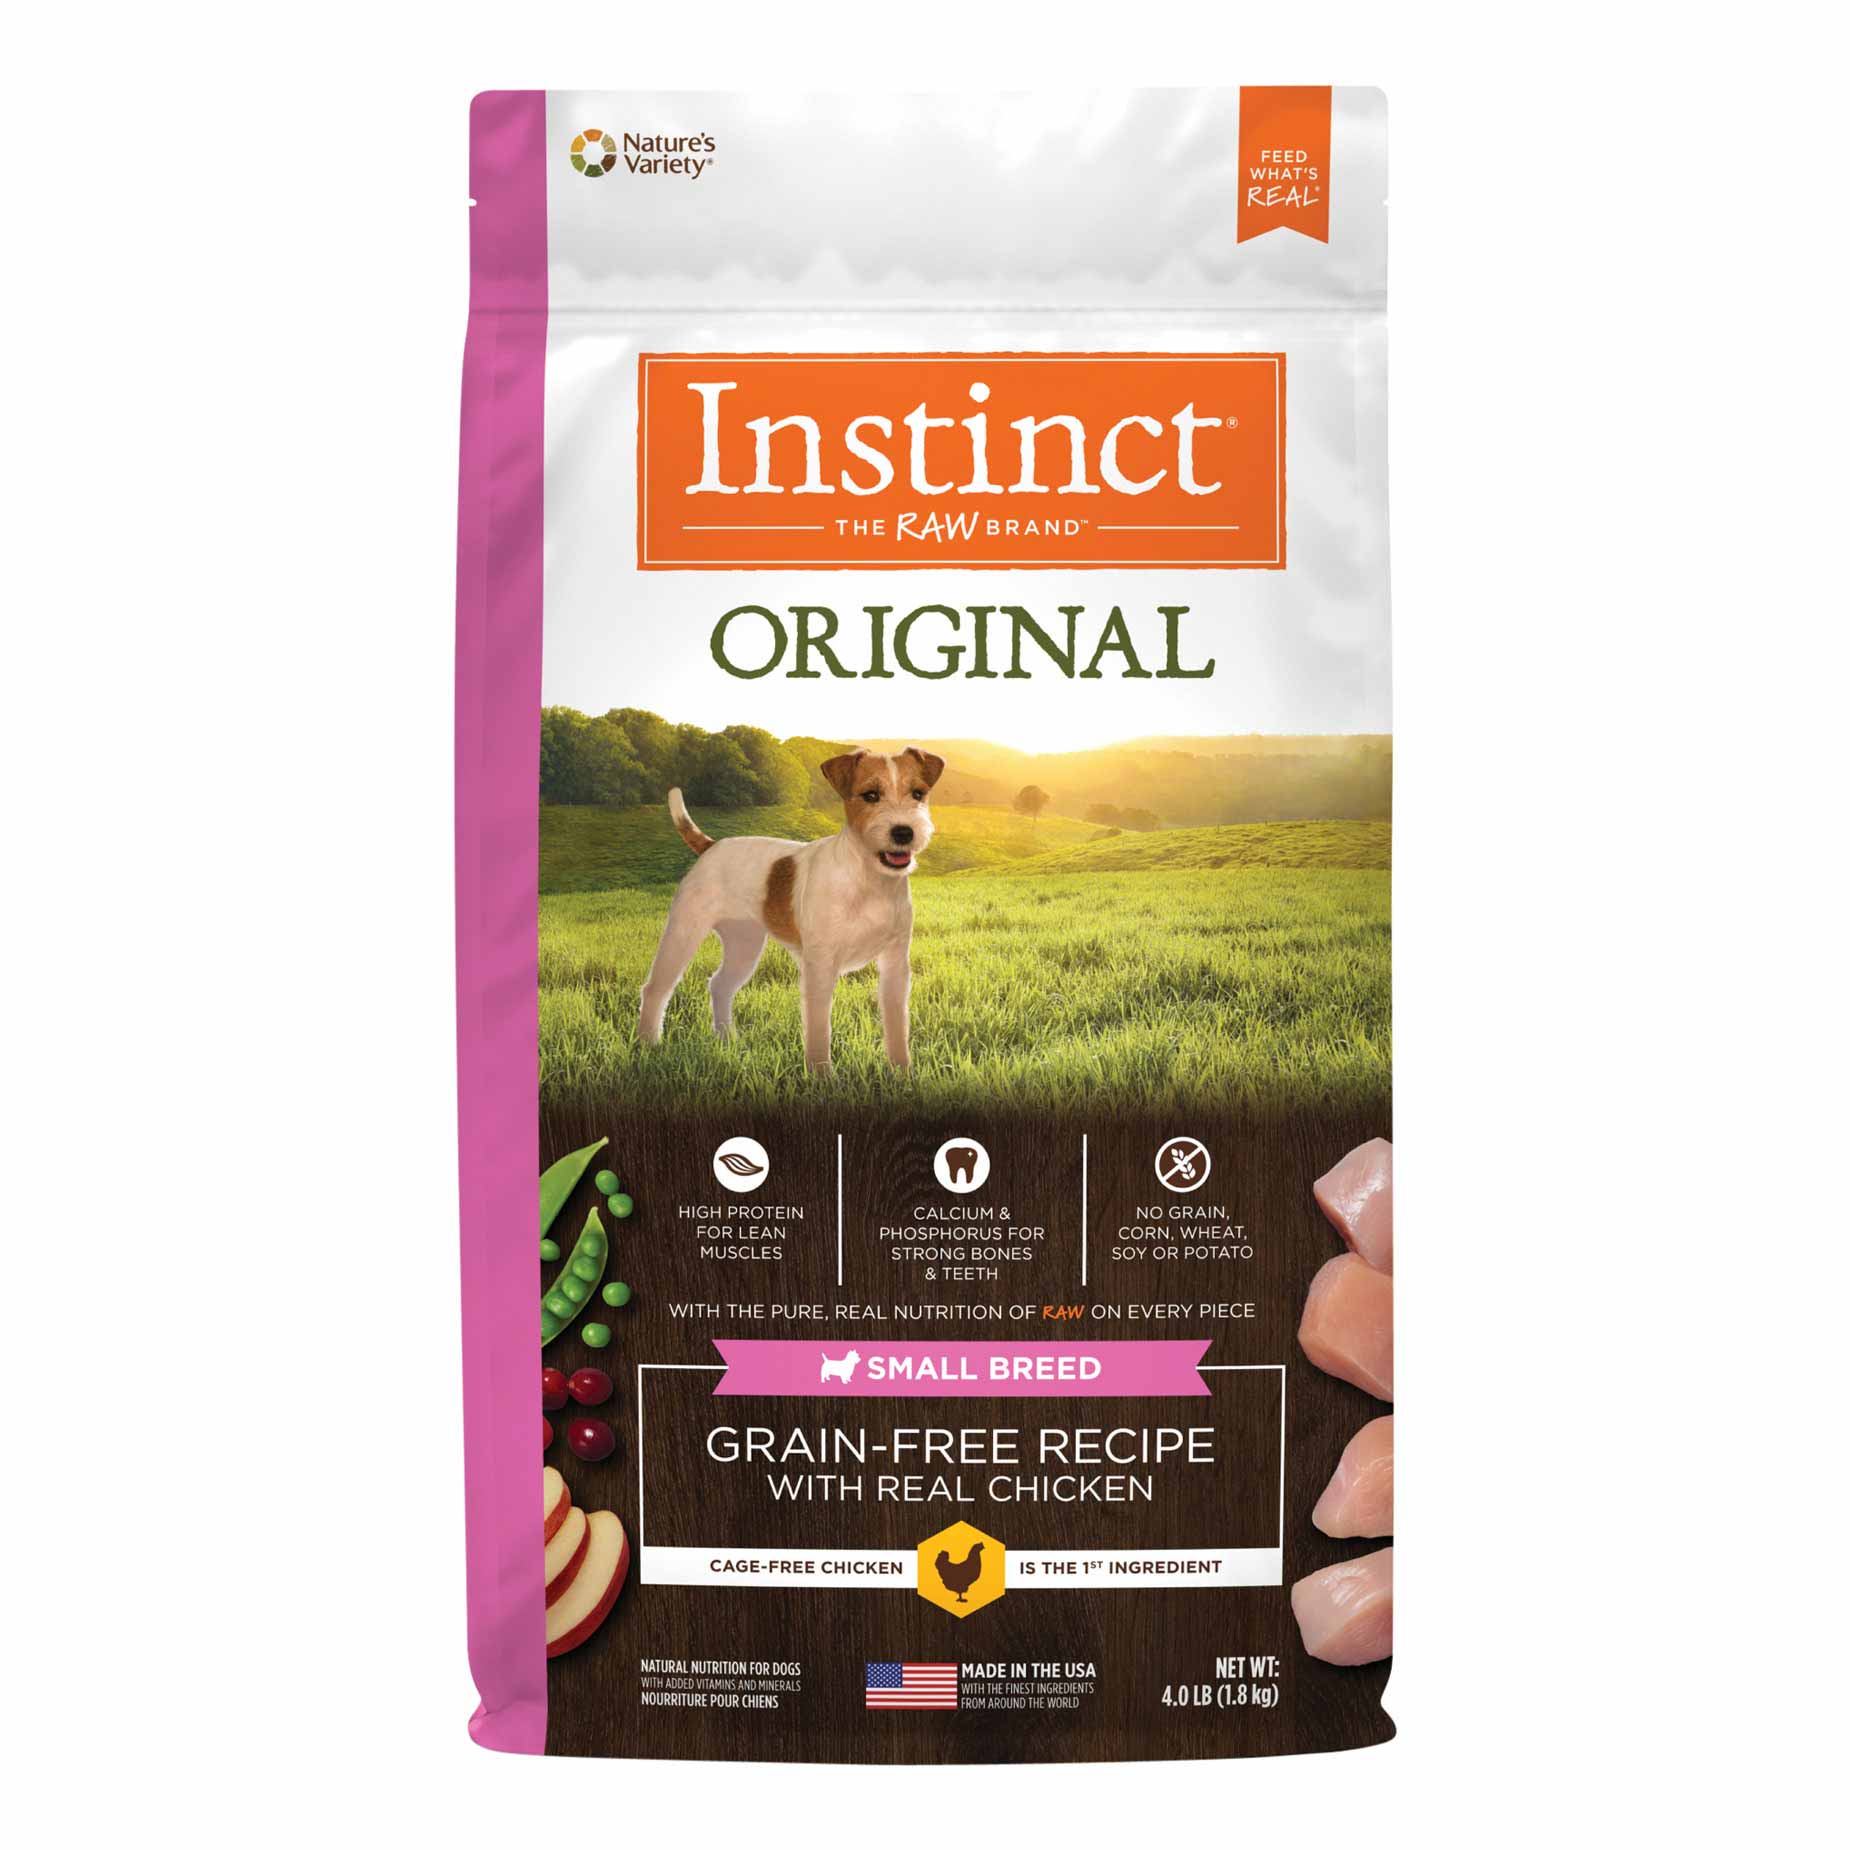 Instinct Original Small Breed Grain-Free Recipe with Real Chicken Freeze-Dried Raw Coated Dry Dog Food, 4 Pound Bag